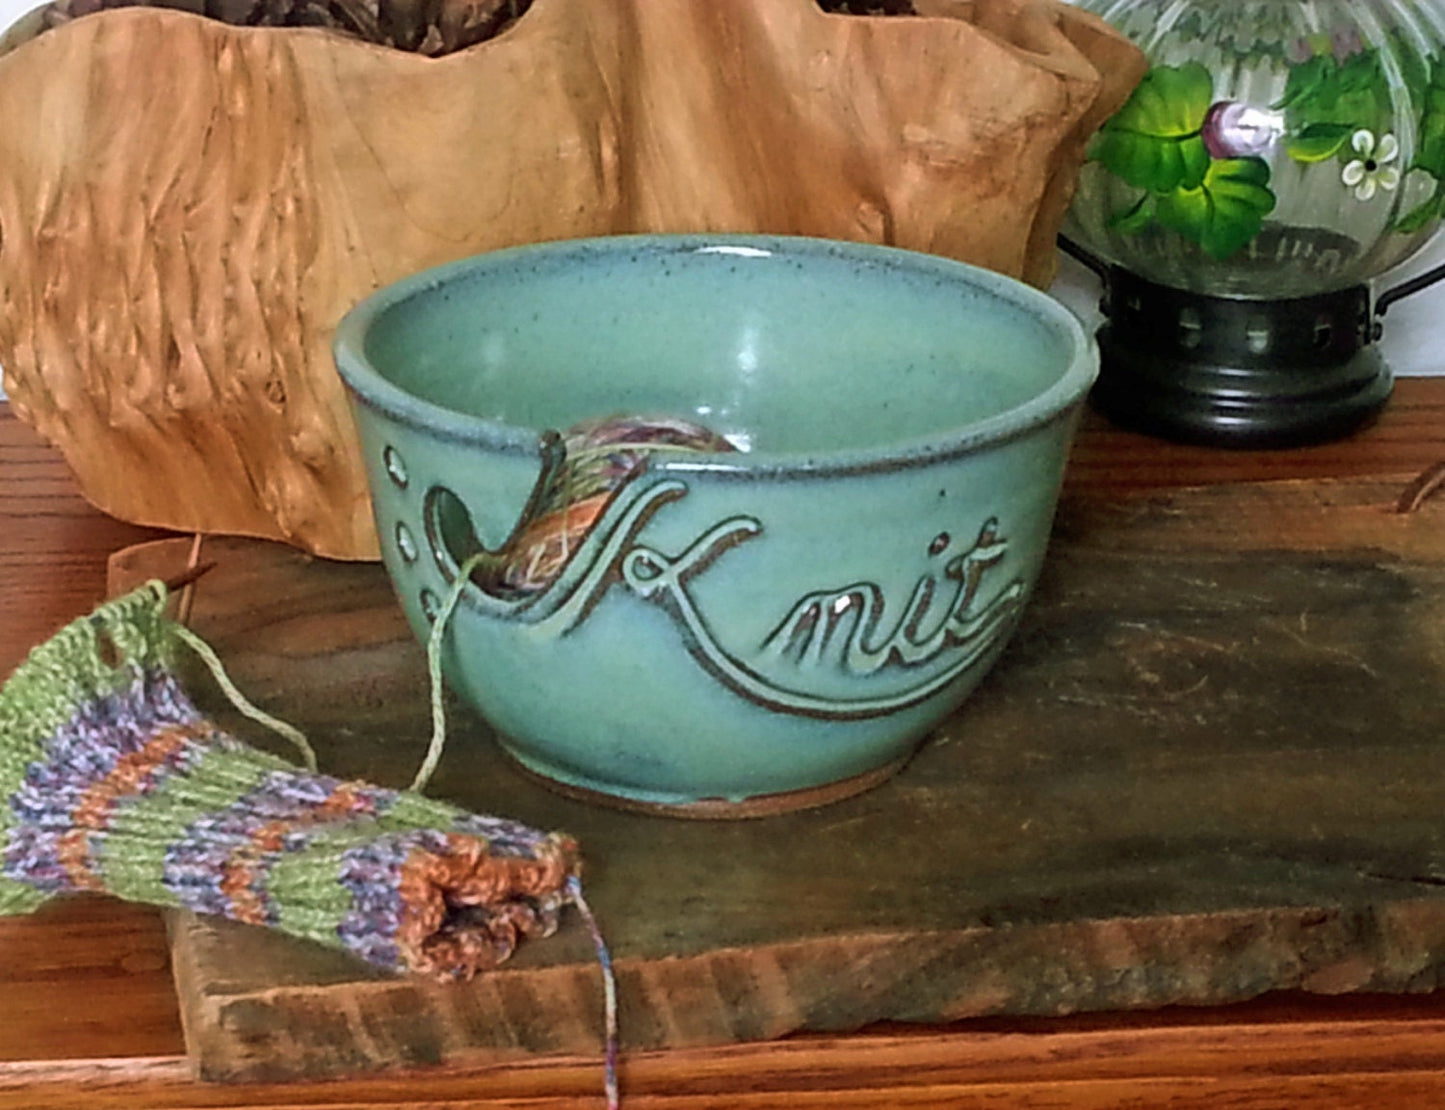 Large KNIT Yarn Bowl with Needle Holes - Hand Made Pottery - Fits Whole Skein Green